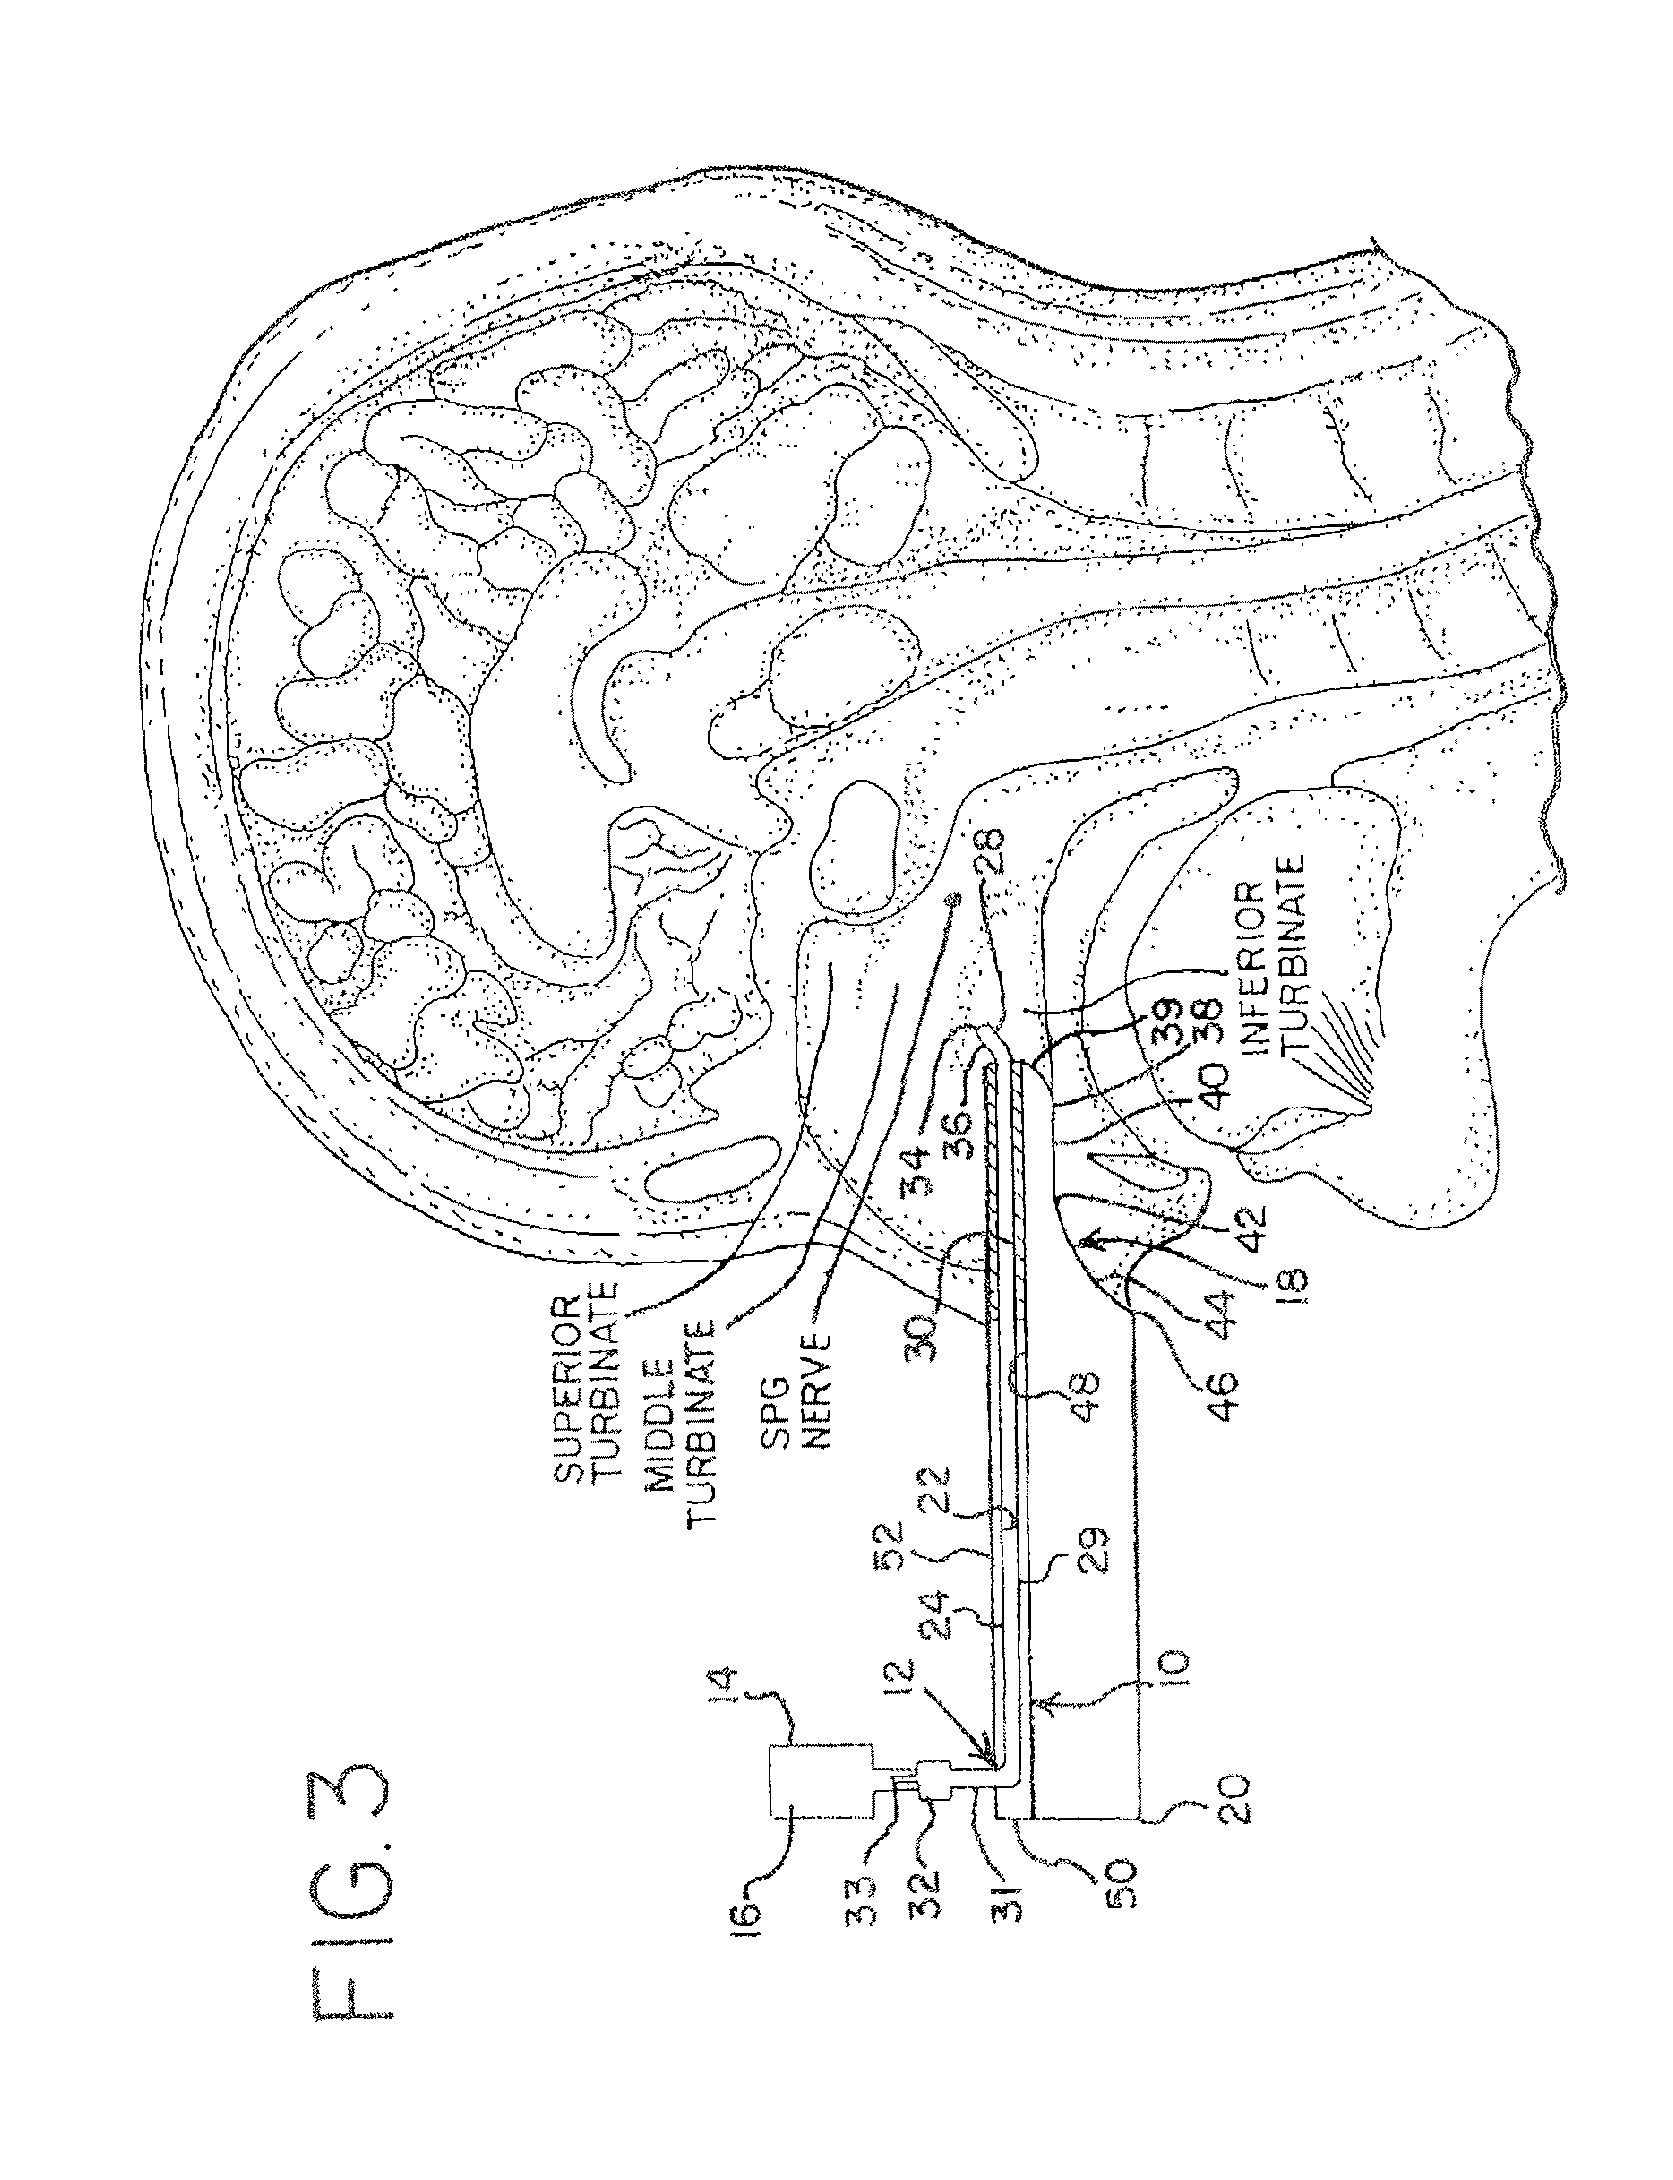 Devices for Delivering a Medicament and Connector for Same